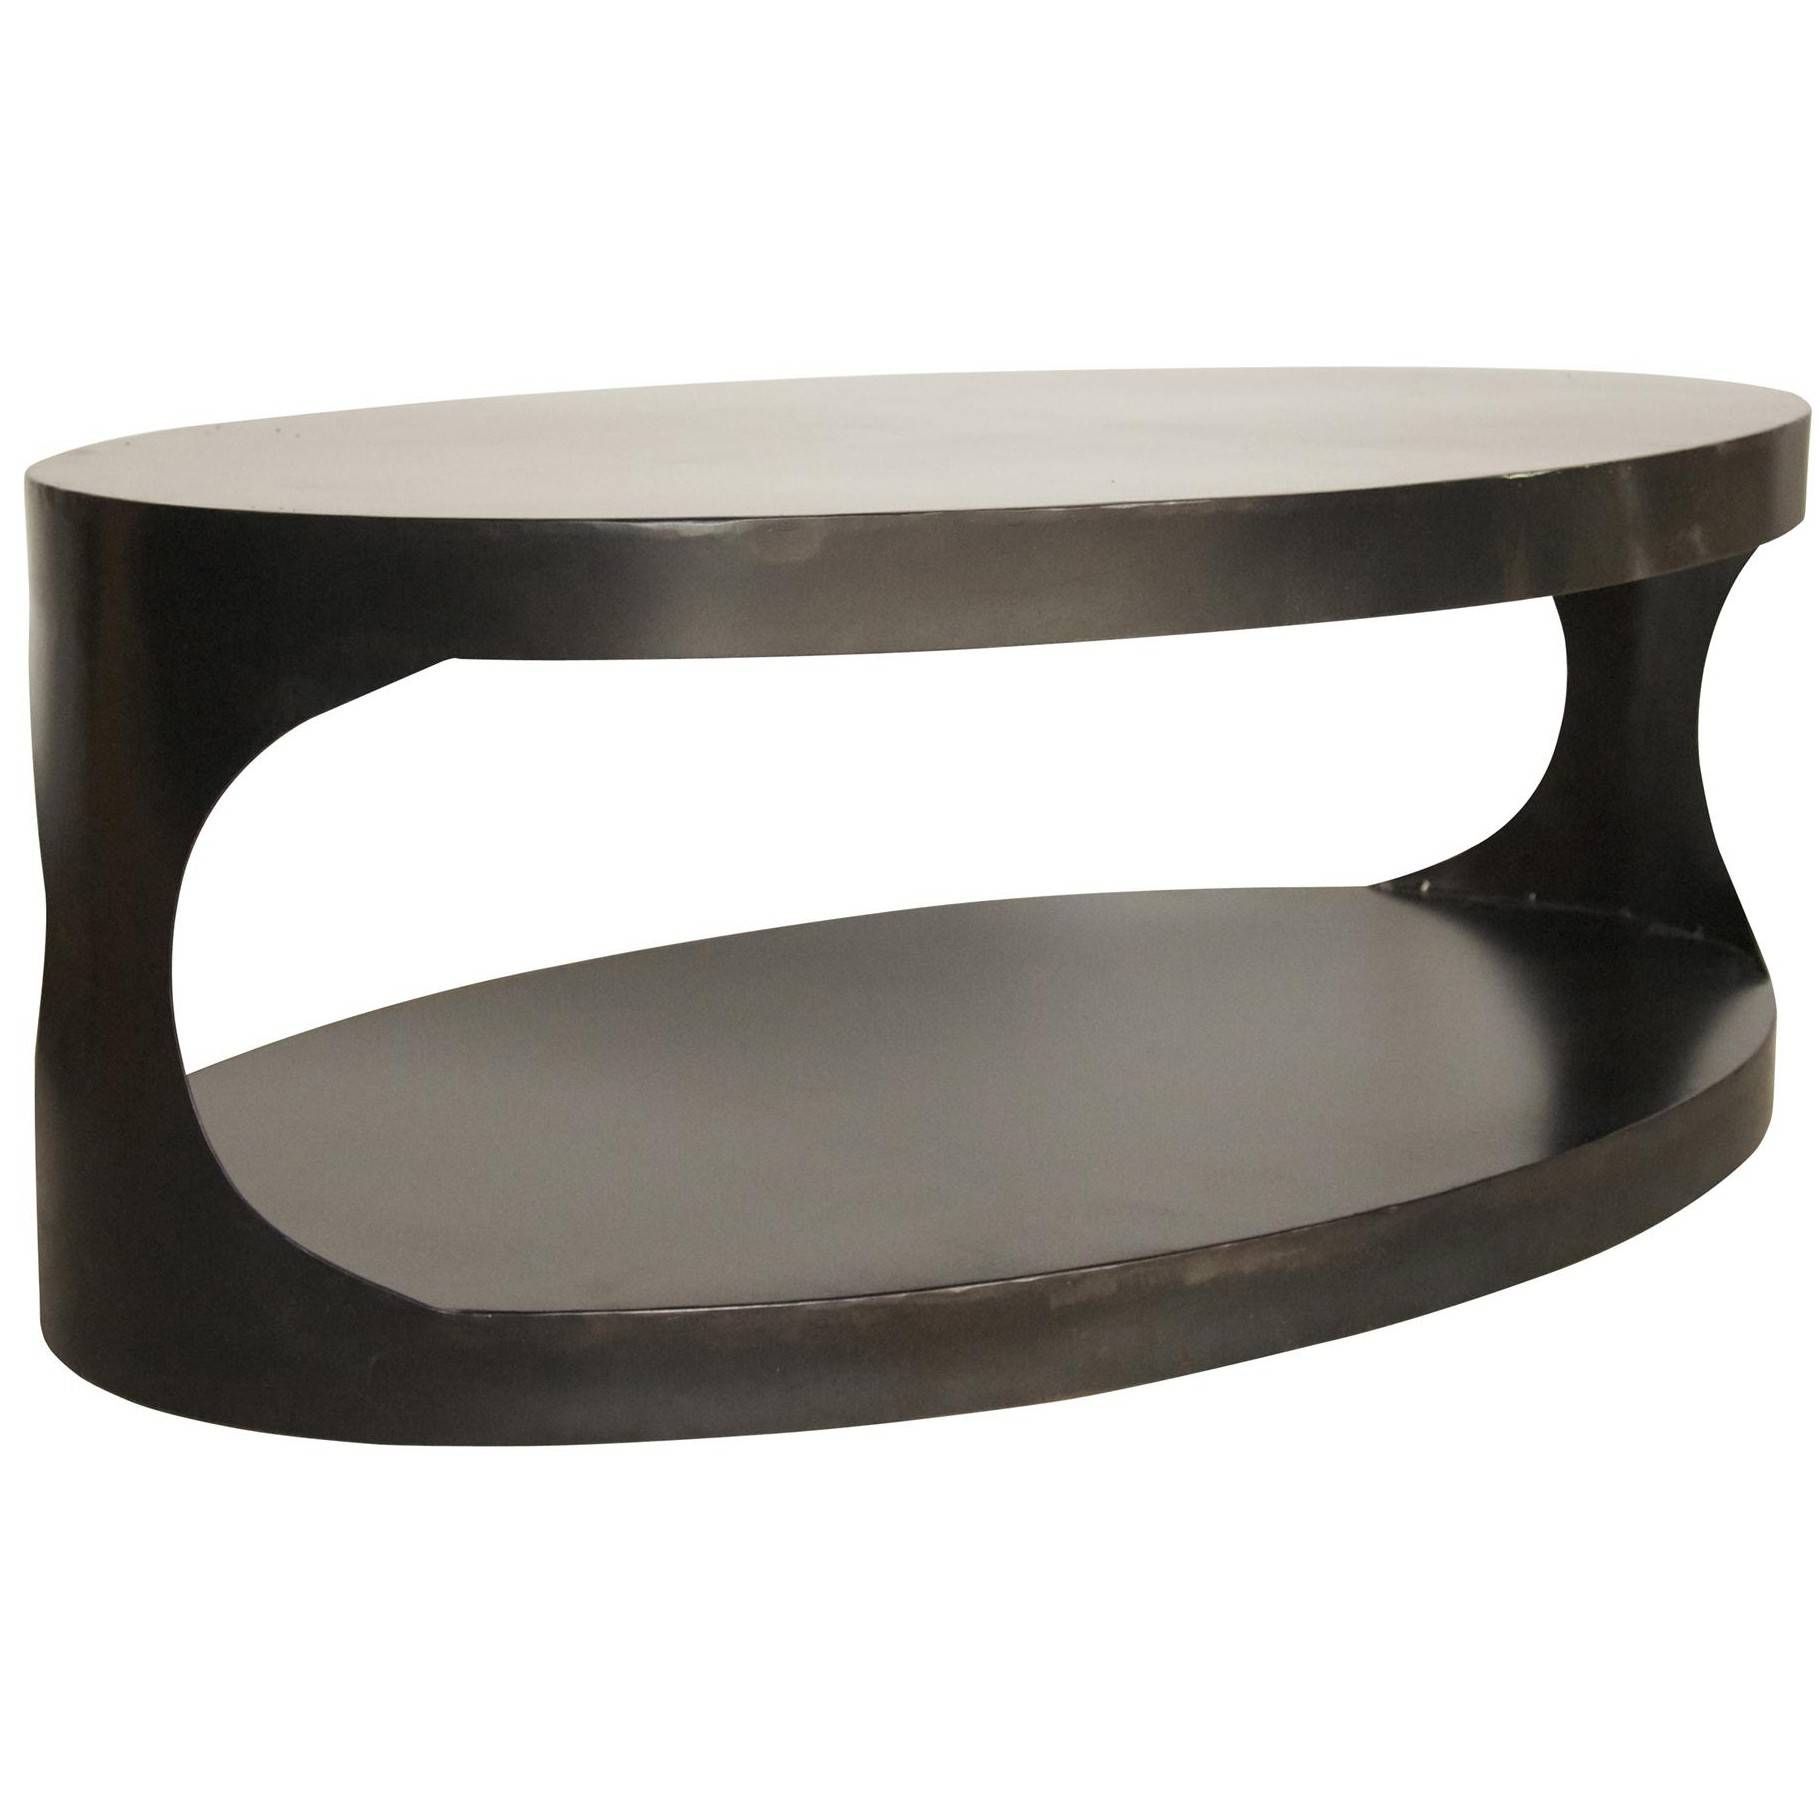 Coffee Tables: Unique Oval Coffee Tables Design Ideas Oval Glass Inside Black Oval Coffee Tables (View 9 of 30)